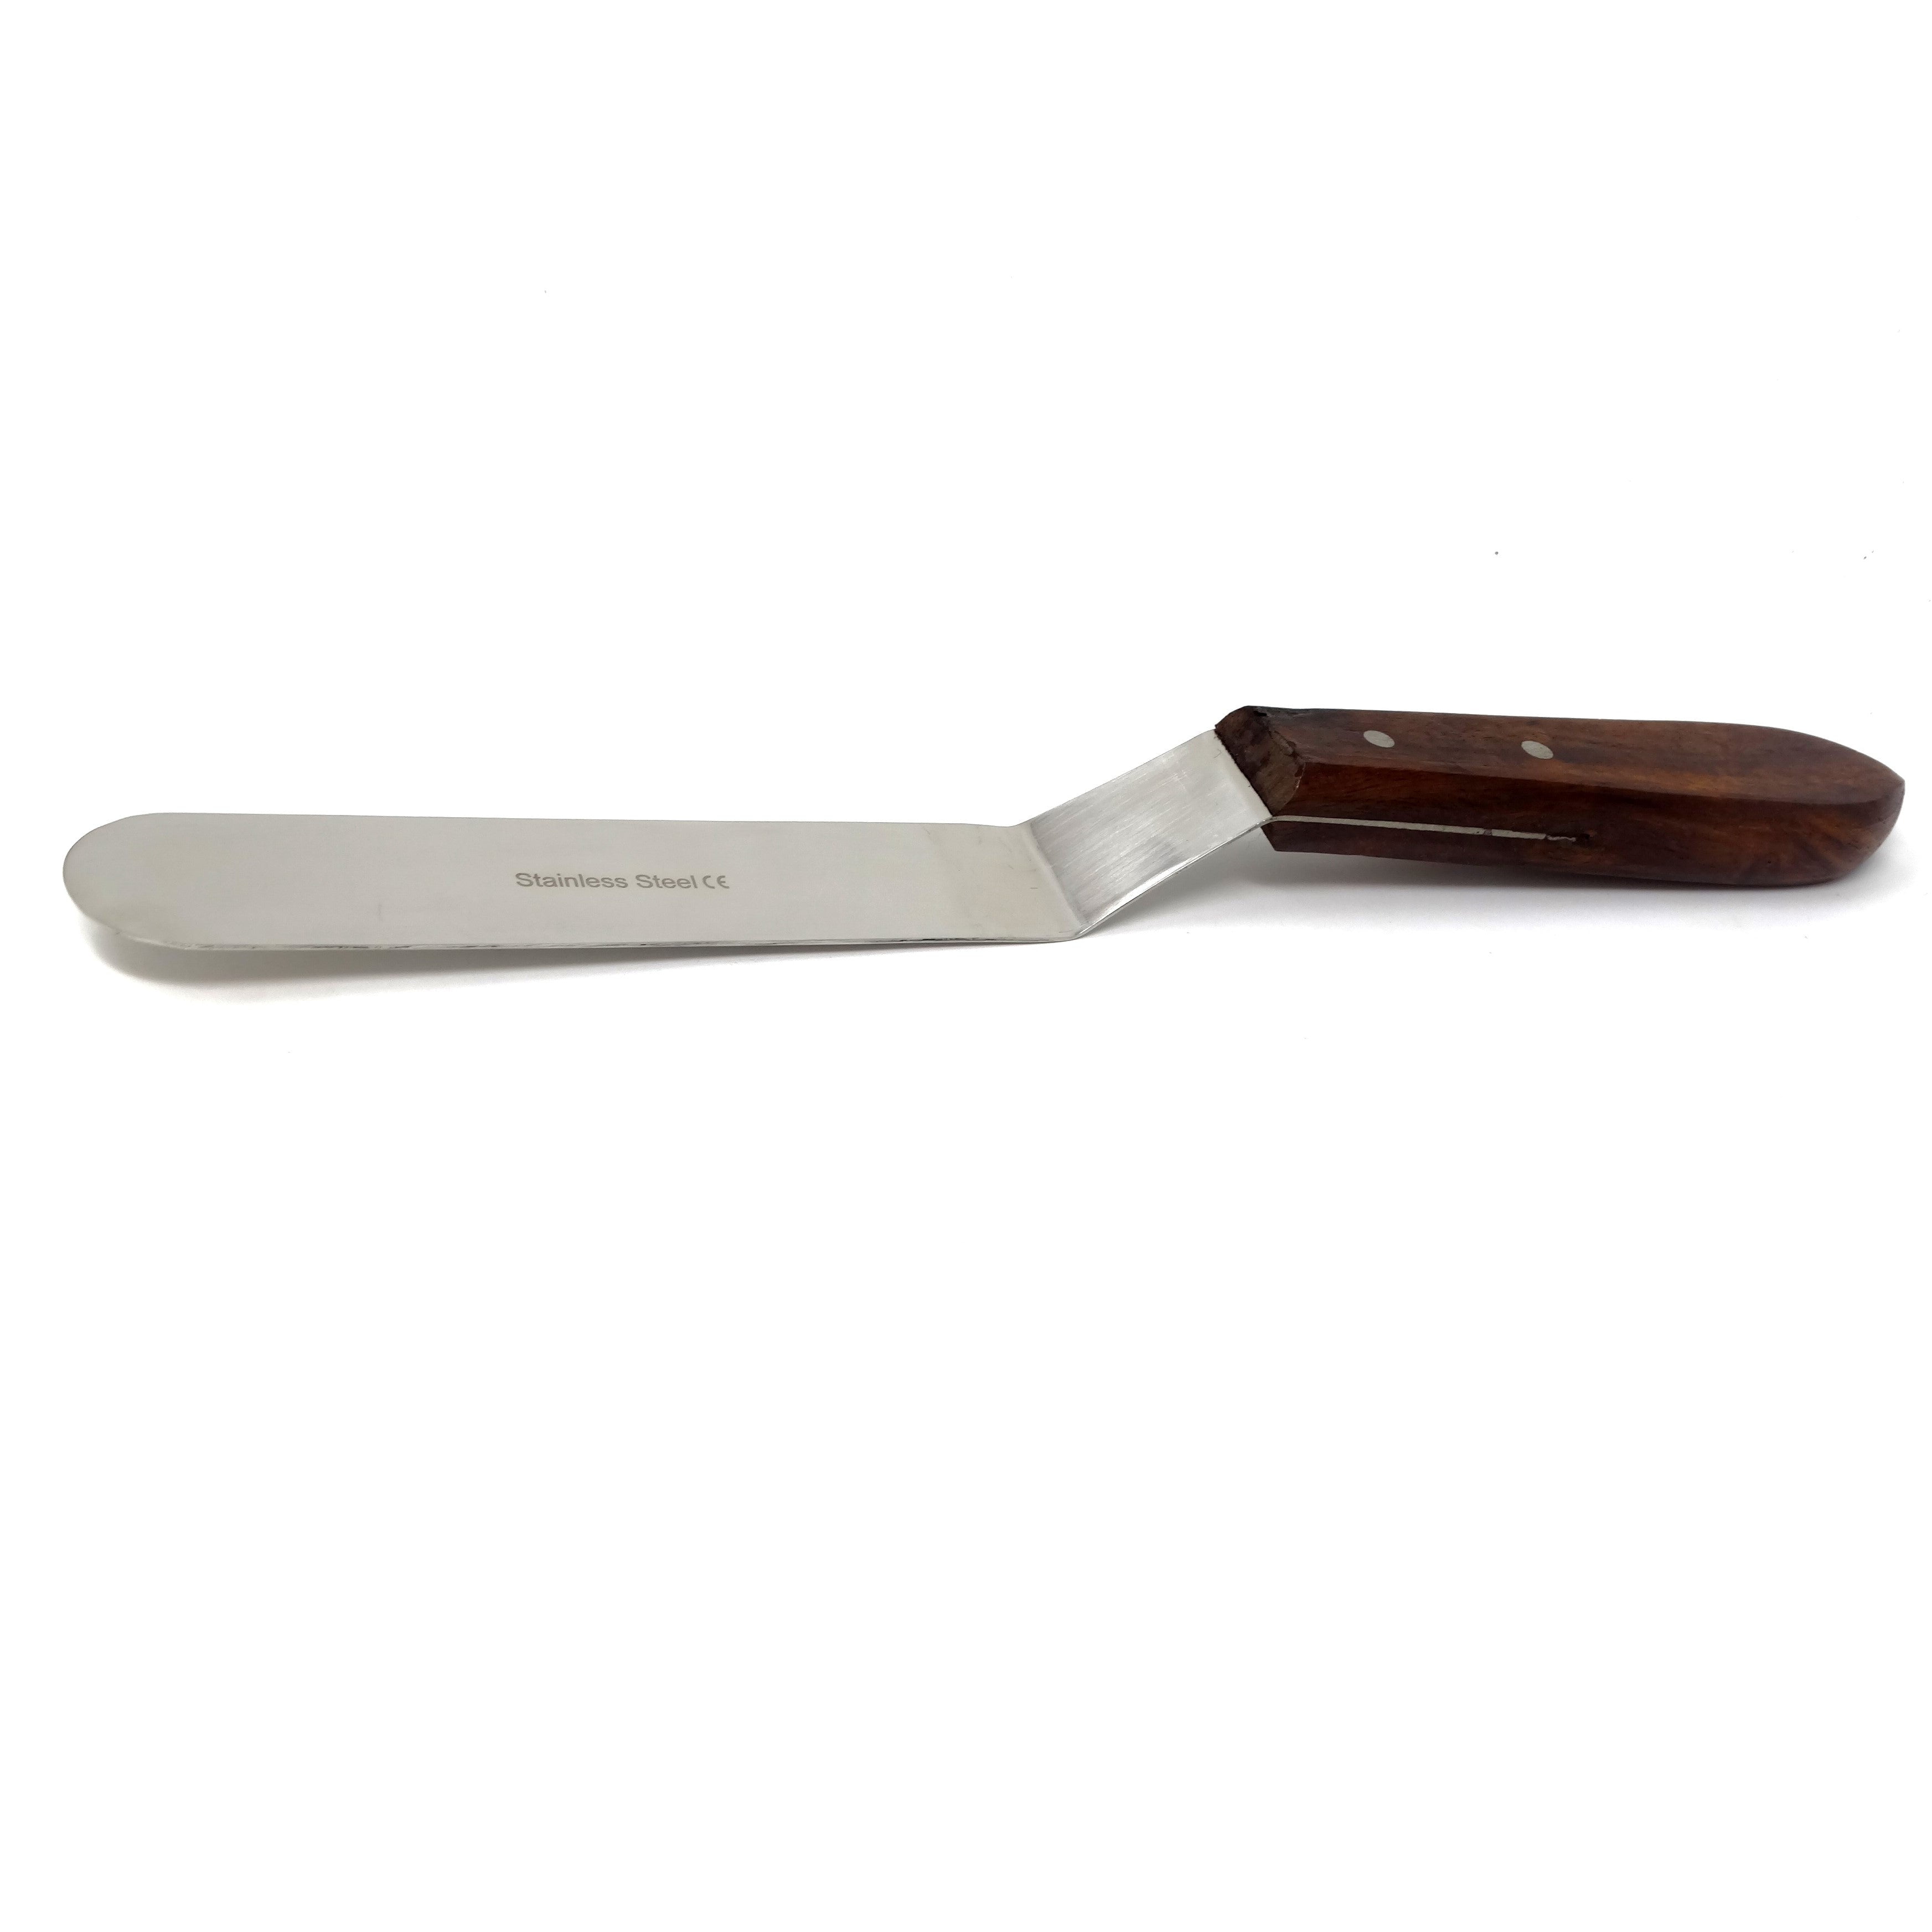 Cake Decorating Angled Icing Spatula, Stainless Steel 8 inch Offset Polished Blade Knife, Wood Handle